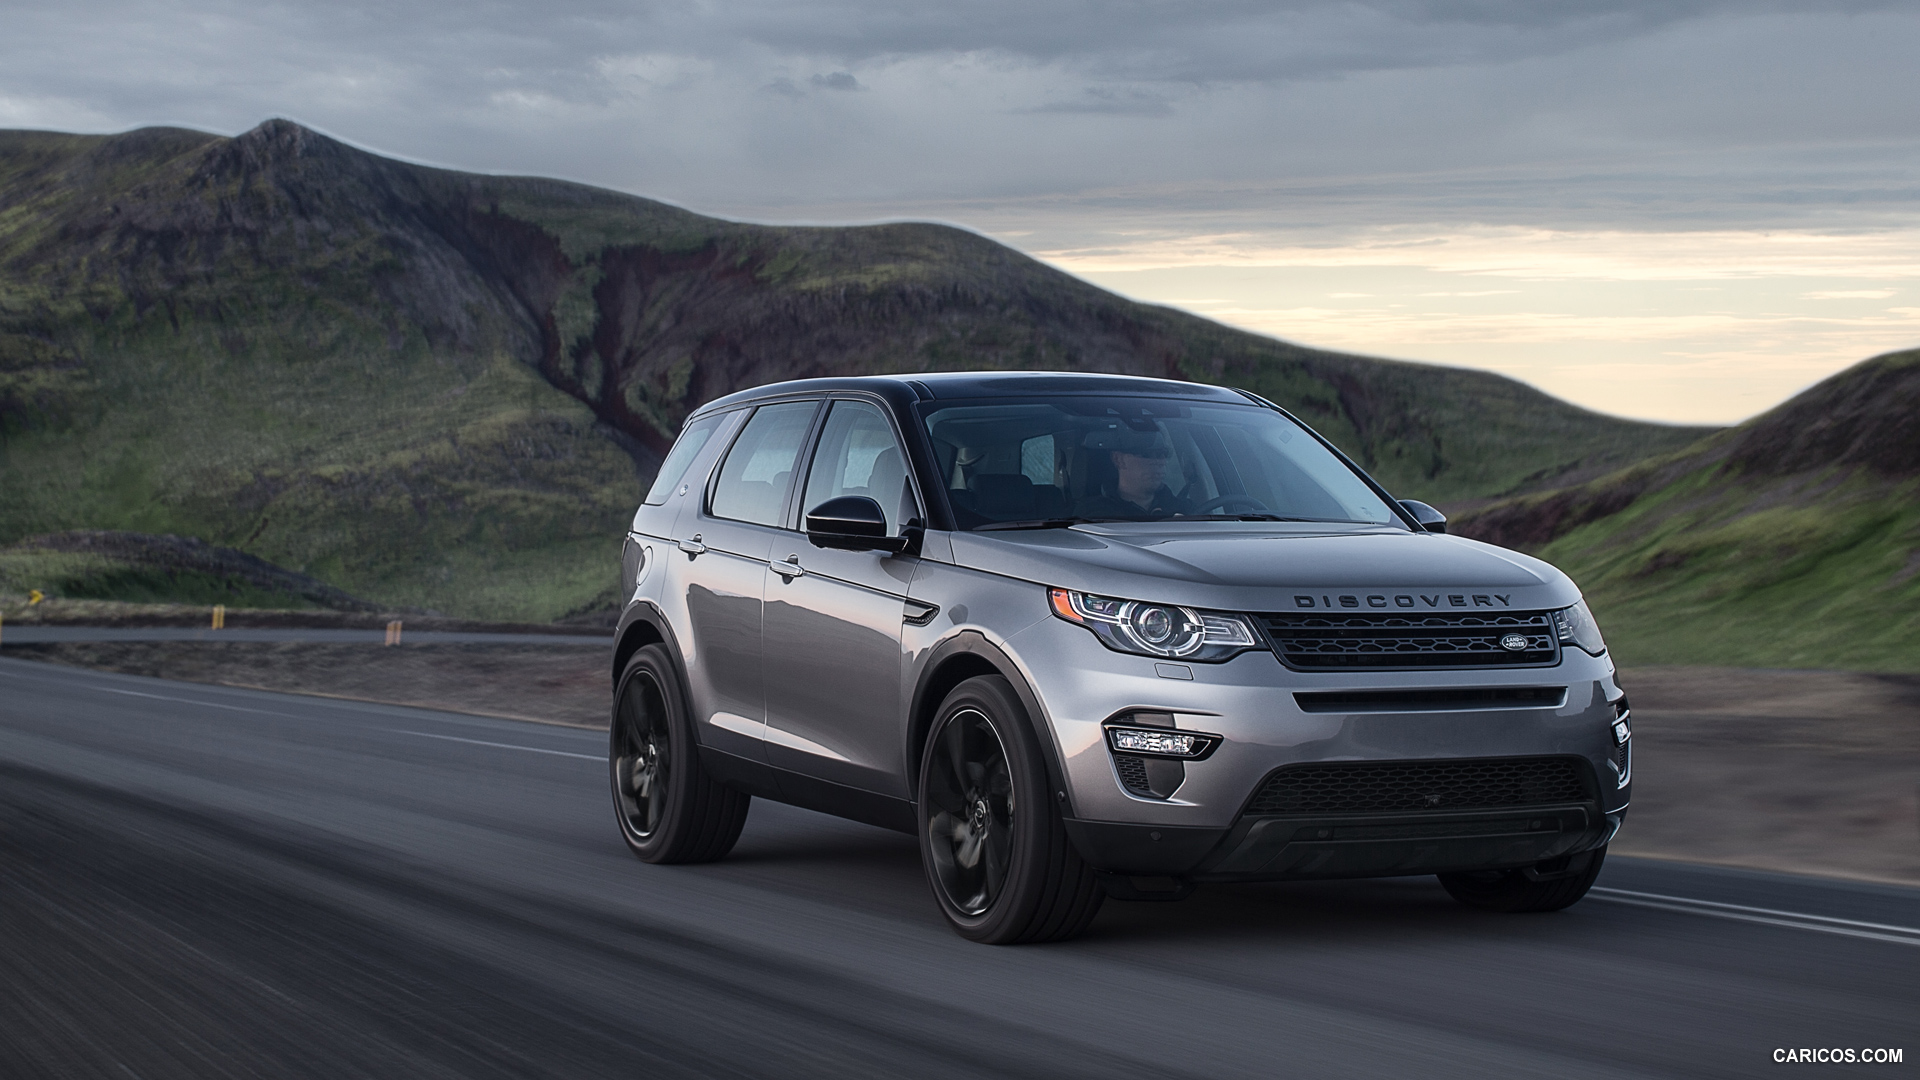 36+] Land Rover Discovery Sport Wallpapers - WallpaperSafari